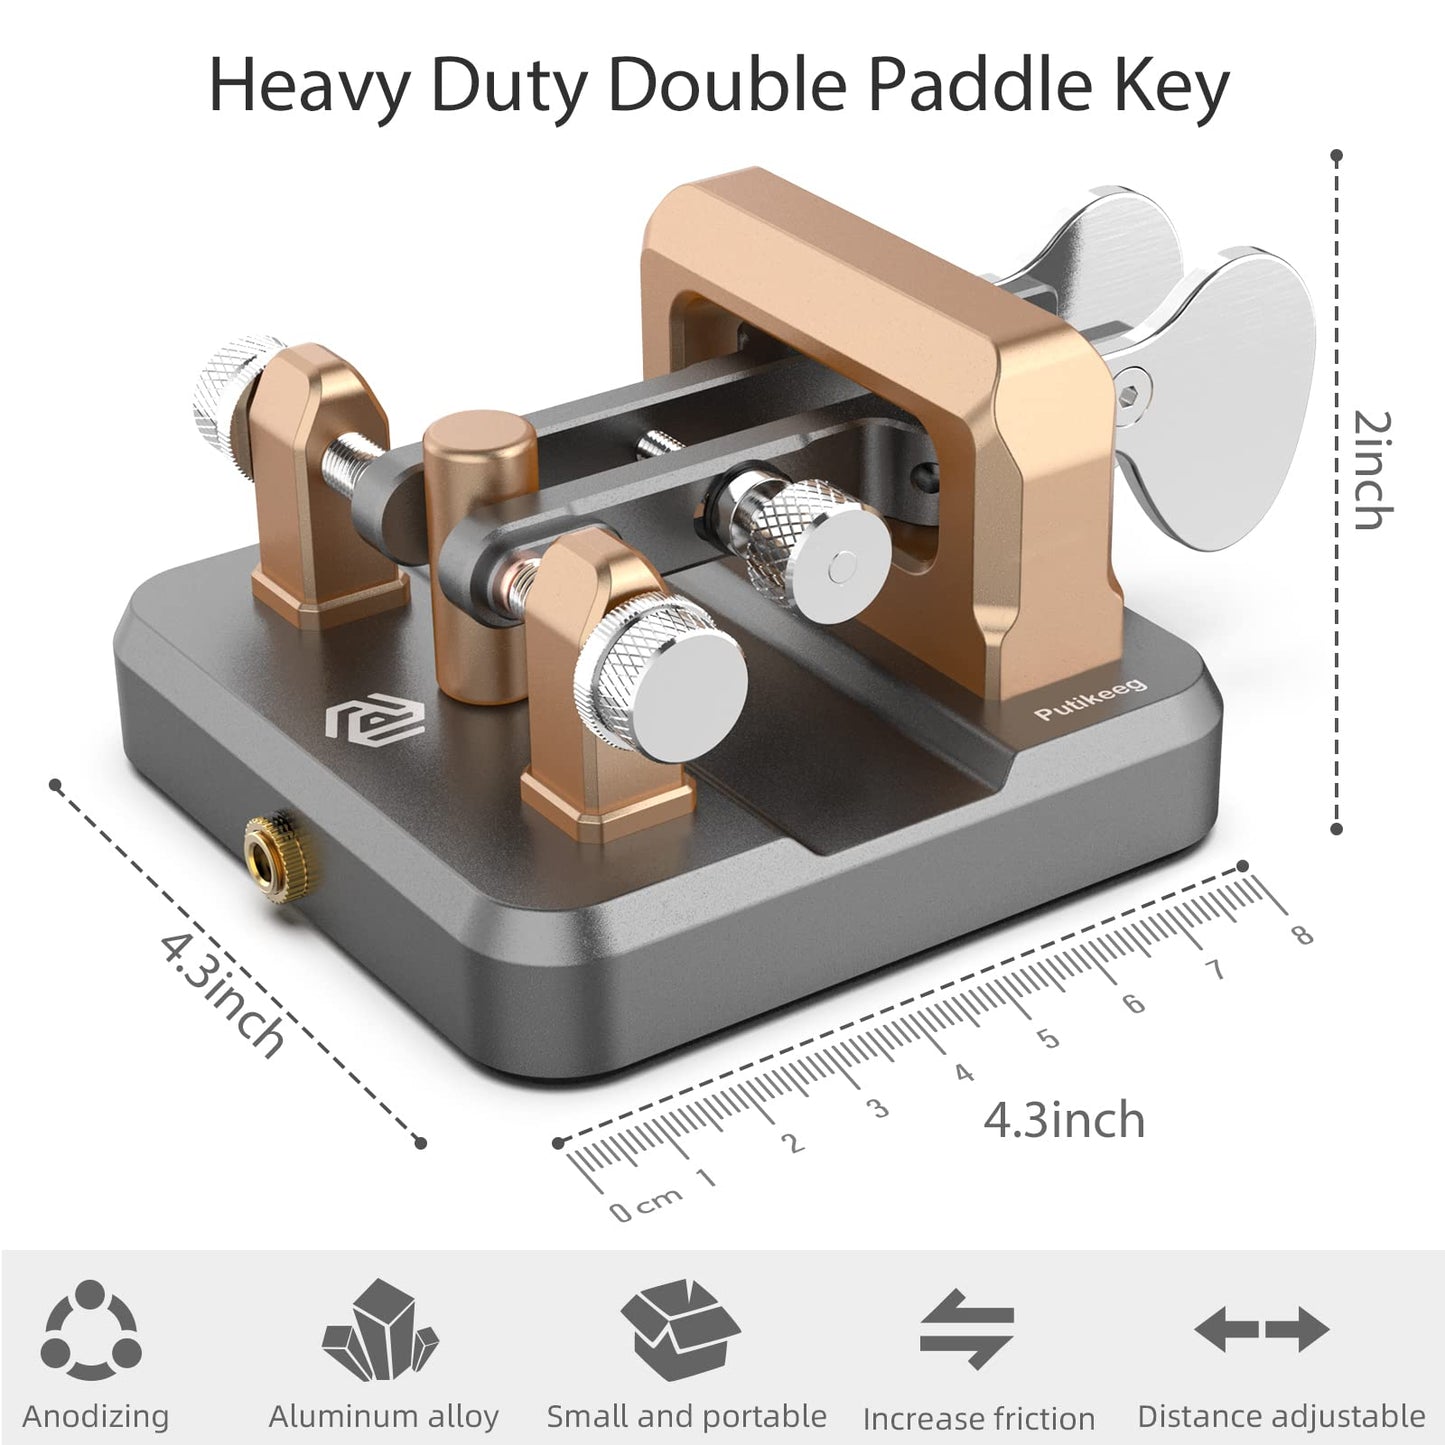 This is a gray CW Keyer Automatic Double Paddle Constructed from durable 6061T6 aluminum alloy, it features four professional-grade bearings and a magnetic return force for precise and comfortable operation. The compact design includes a base with four magnetic magnets for secure attachment to metal surfaces, ensuring stable operation even in outdoor settings. Adjustable paddle distance allows for customization, while a 3.5mm standard stereo jack enables compatibility with various short-wave radios